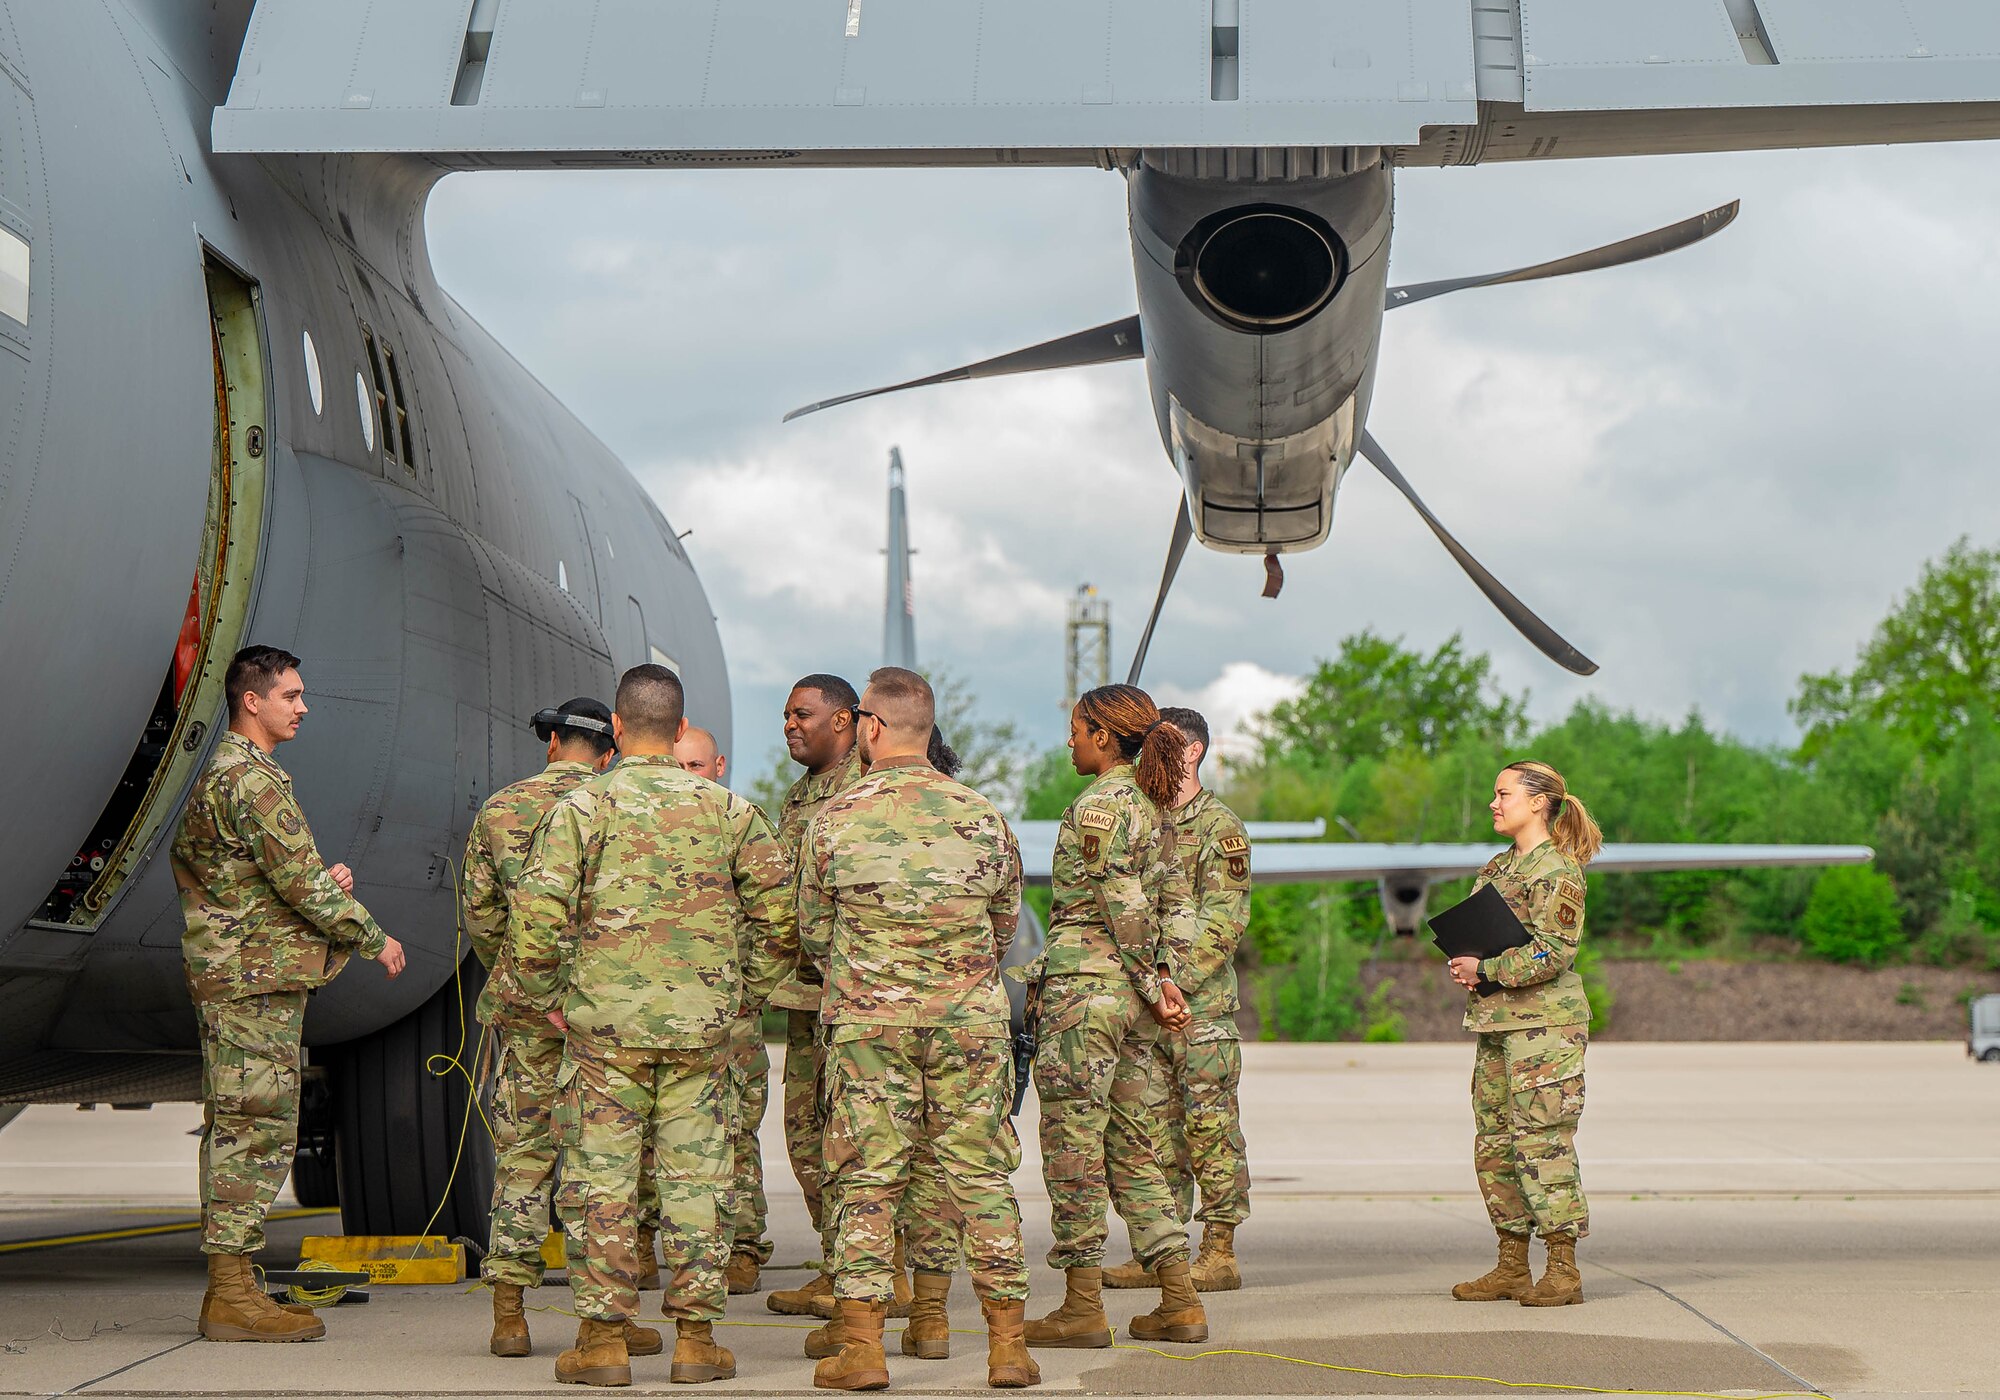 U.S. Air Force members from the 86th Logistics Readiness Squadron and the 86th Aircraft Maintenance Squadron gather for a safety brief before demonstrating the refueling process of a C-130J Super Hercules aircraft at Ramstein Air Base, Germany, May 11, 2023. They conducted an immersion tour with the 86th Airlift Wing command team to provide a closer look at the achievements and challenges of the 86th LRS fuels team.